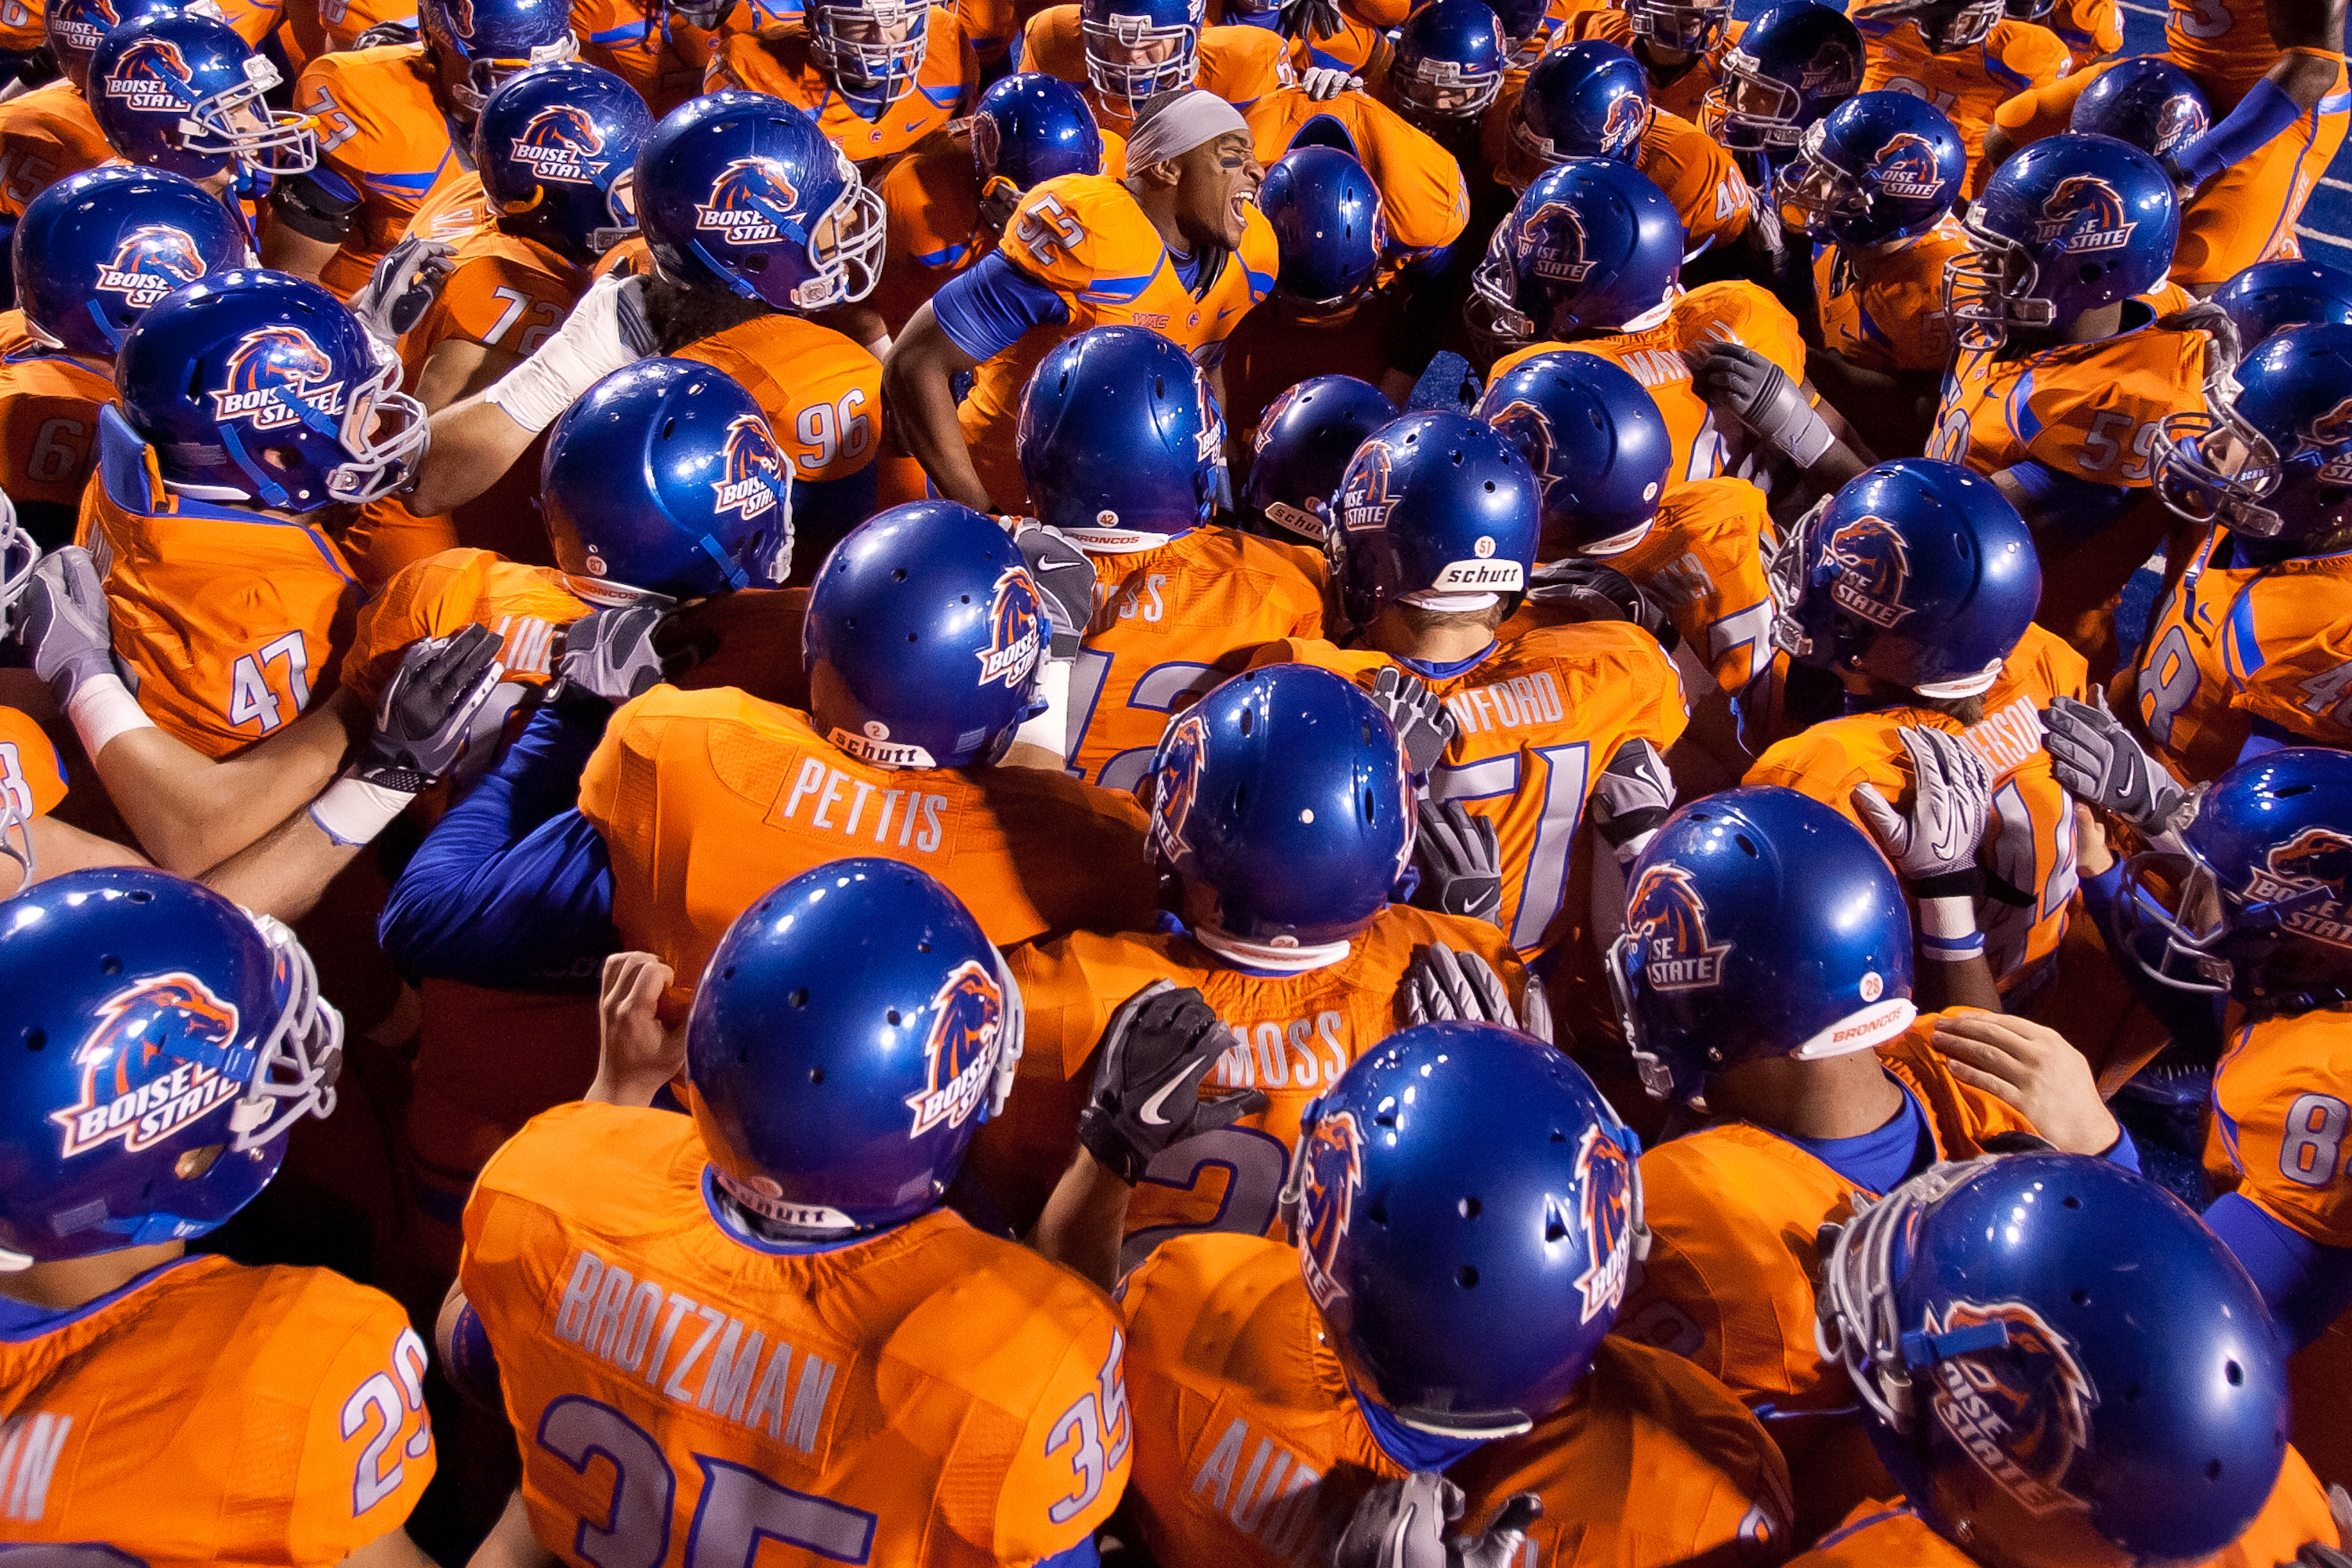 BOISE, ID - NOVEMBER 19:  Derrell Acrey #52 psyches up the Boise State Broncos before the game against the Fresno State Bulldogs at Bronco Stadium on November 19, 2010 in Boise, Idaho.  (Photo by Otto Kitsinger III/Getty Images)